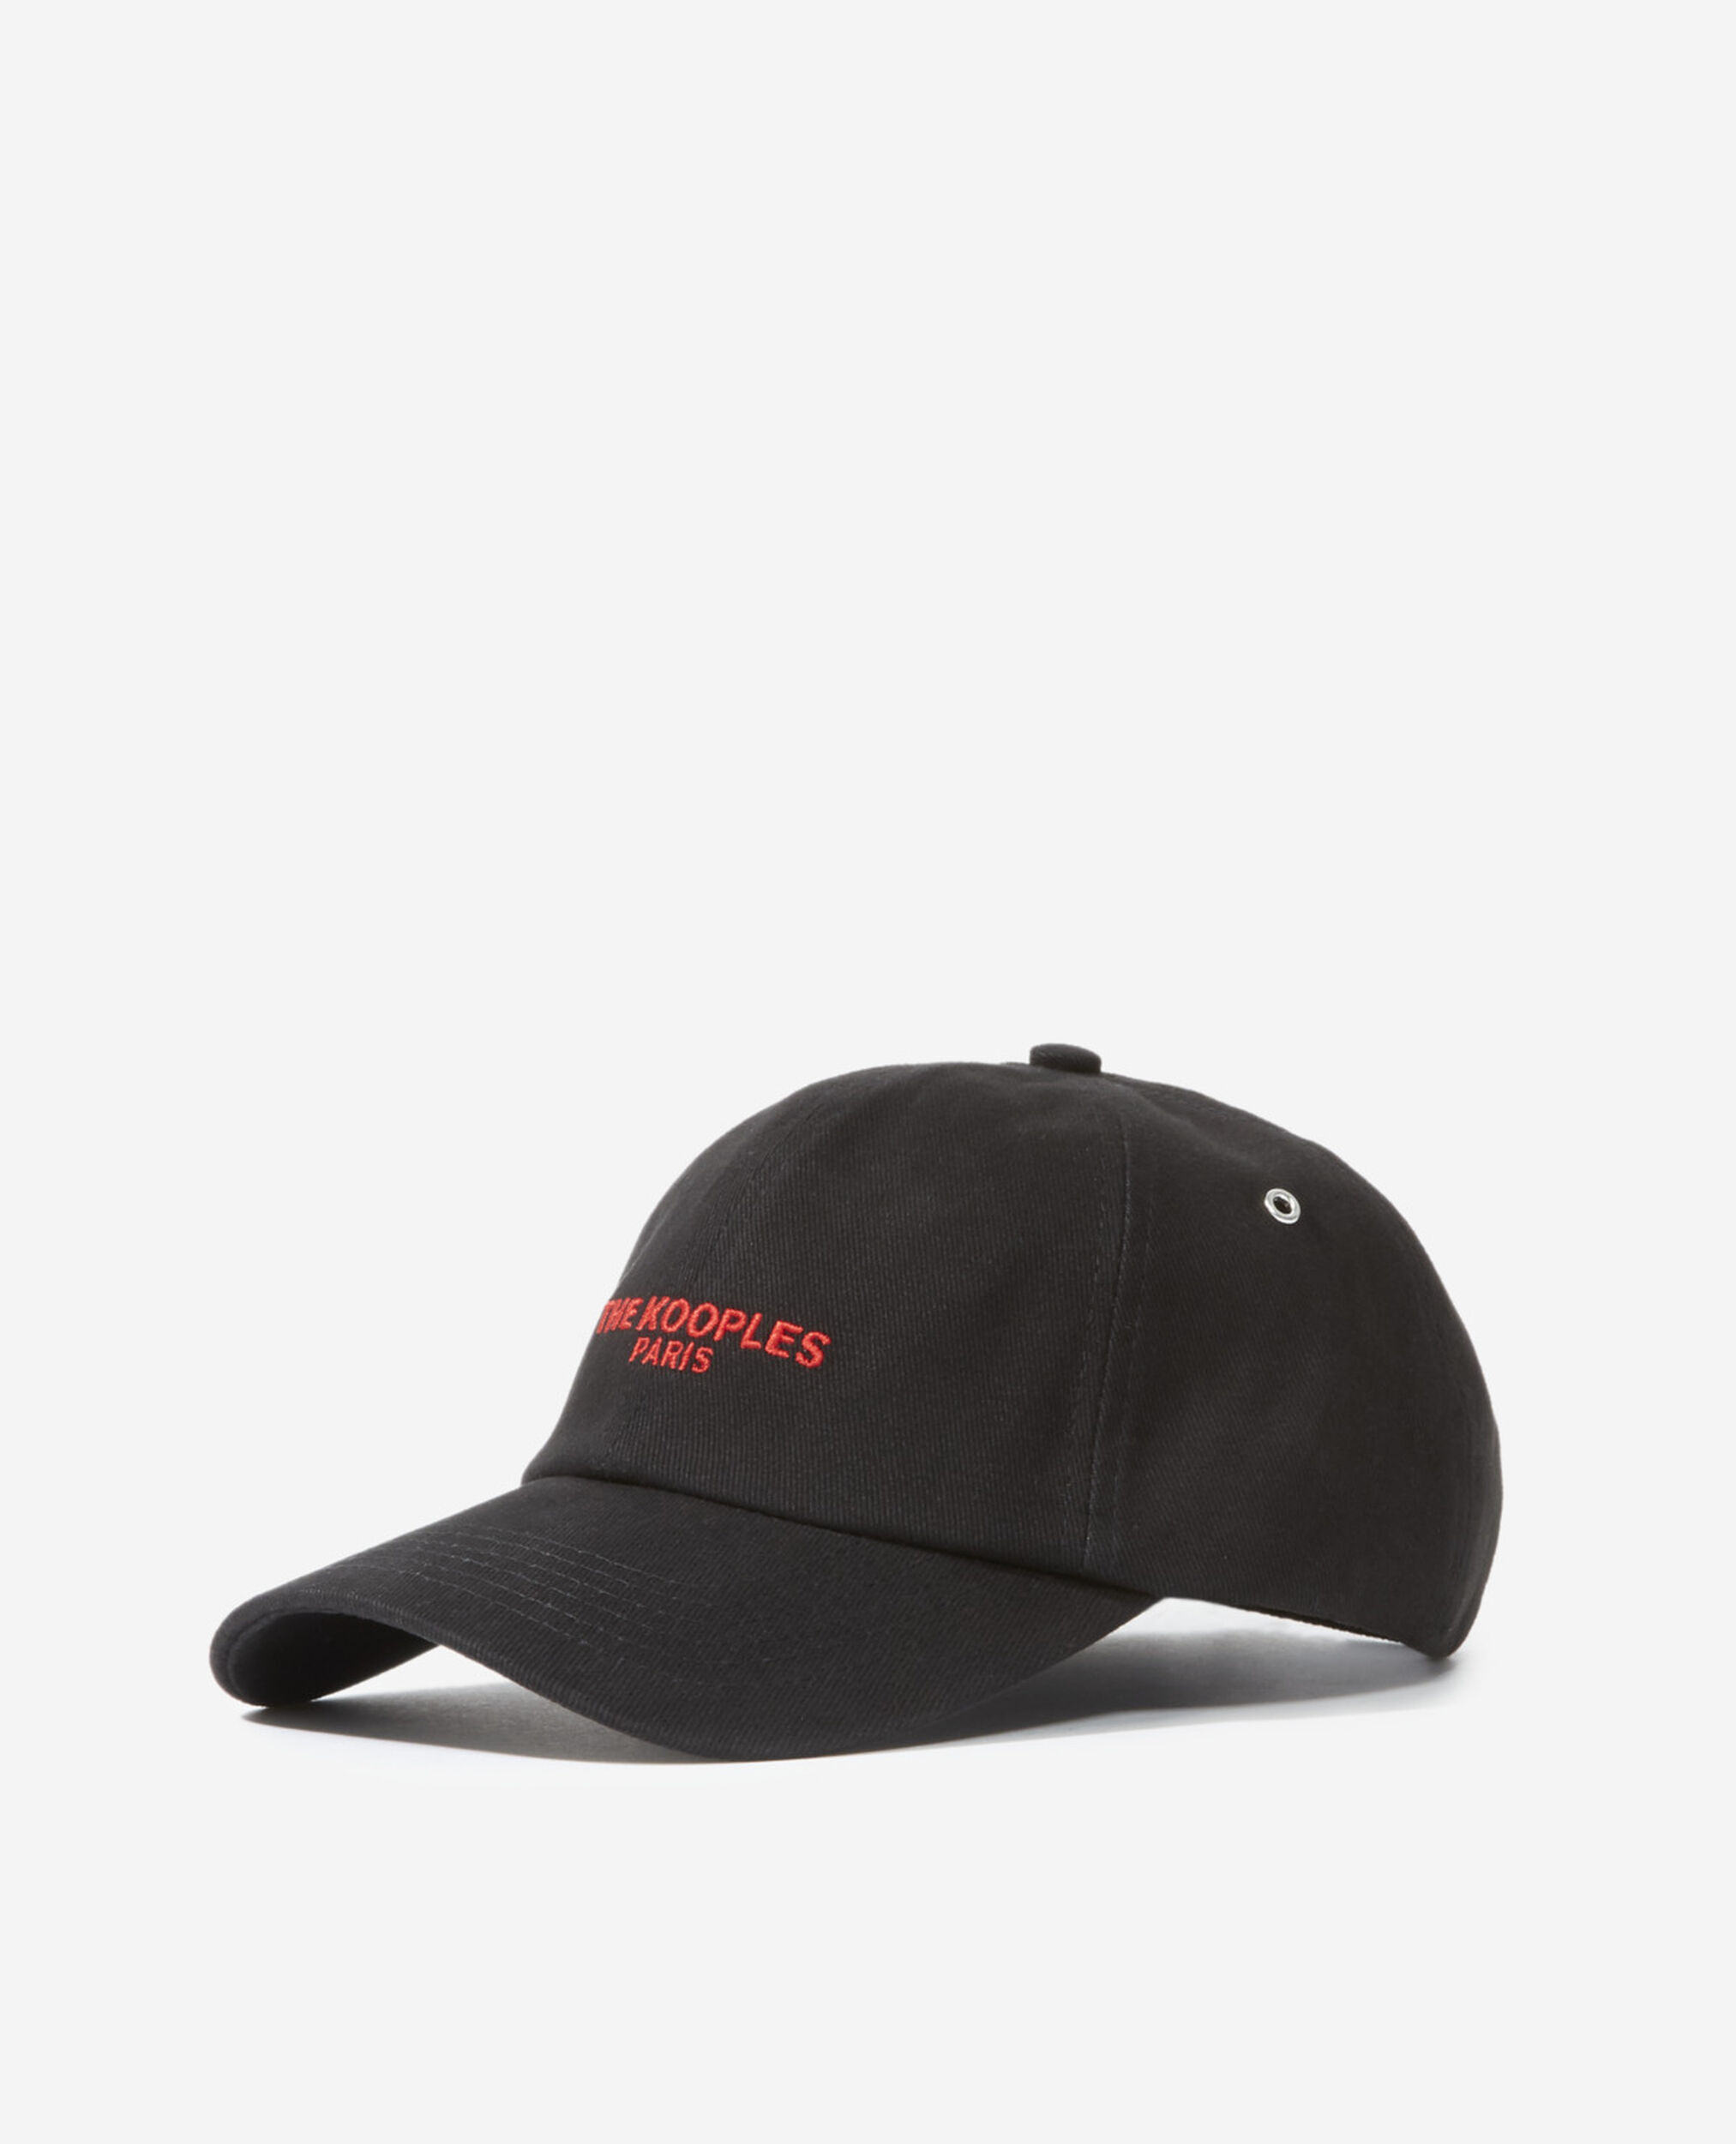 Black cotton cap with red embroidered logo, BLACK, hi-res image number null